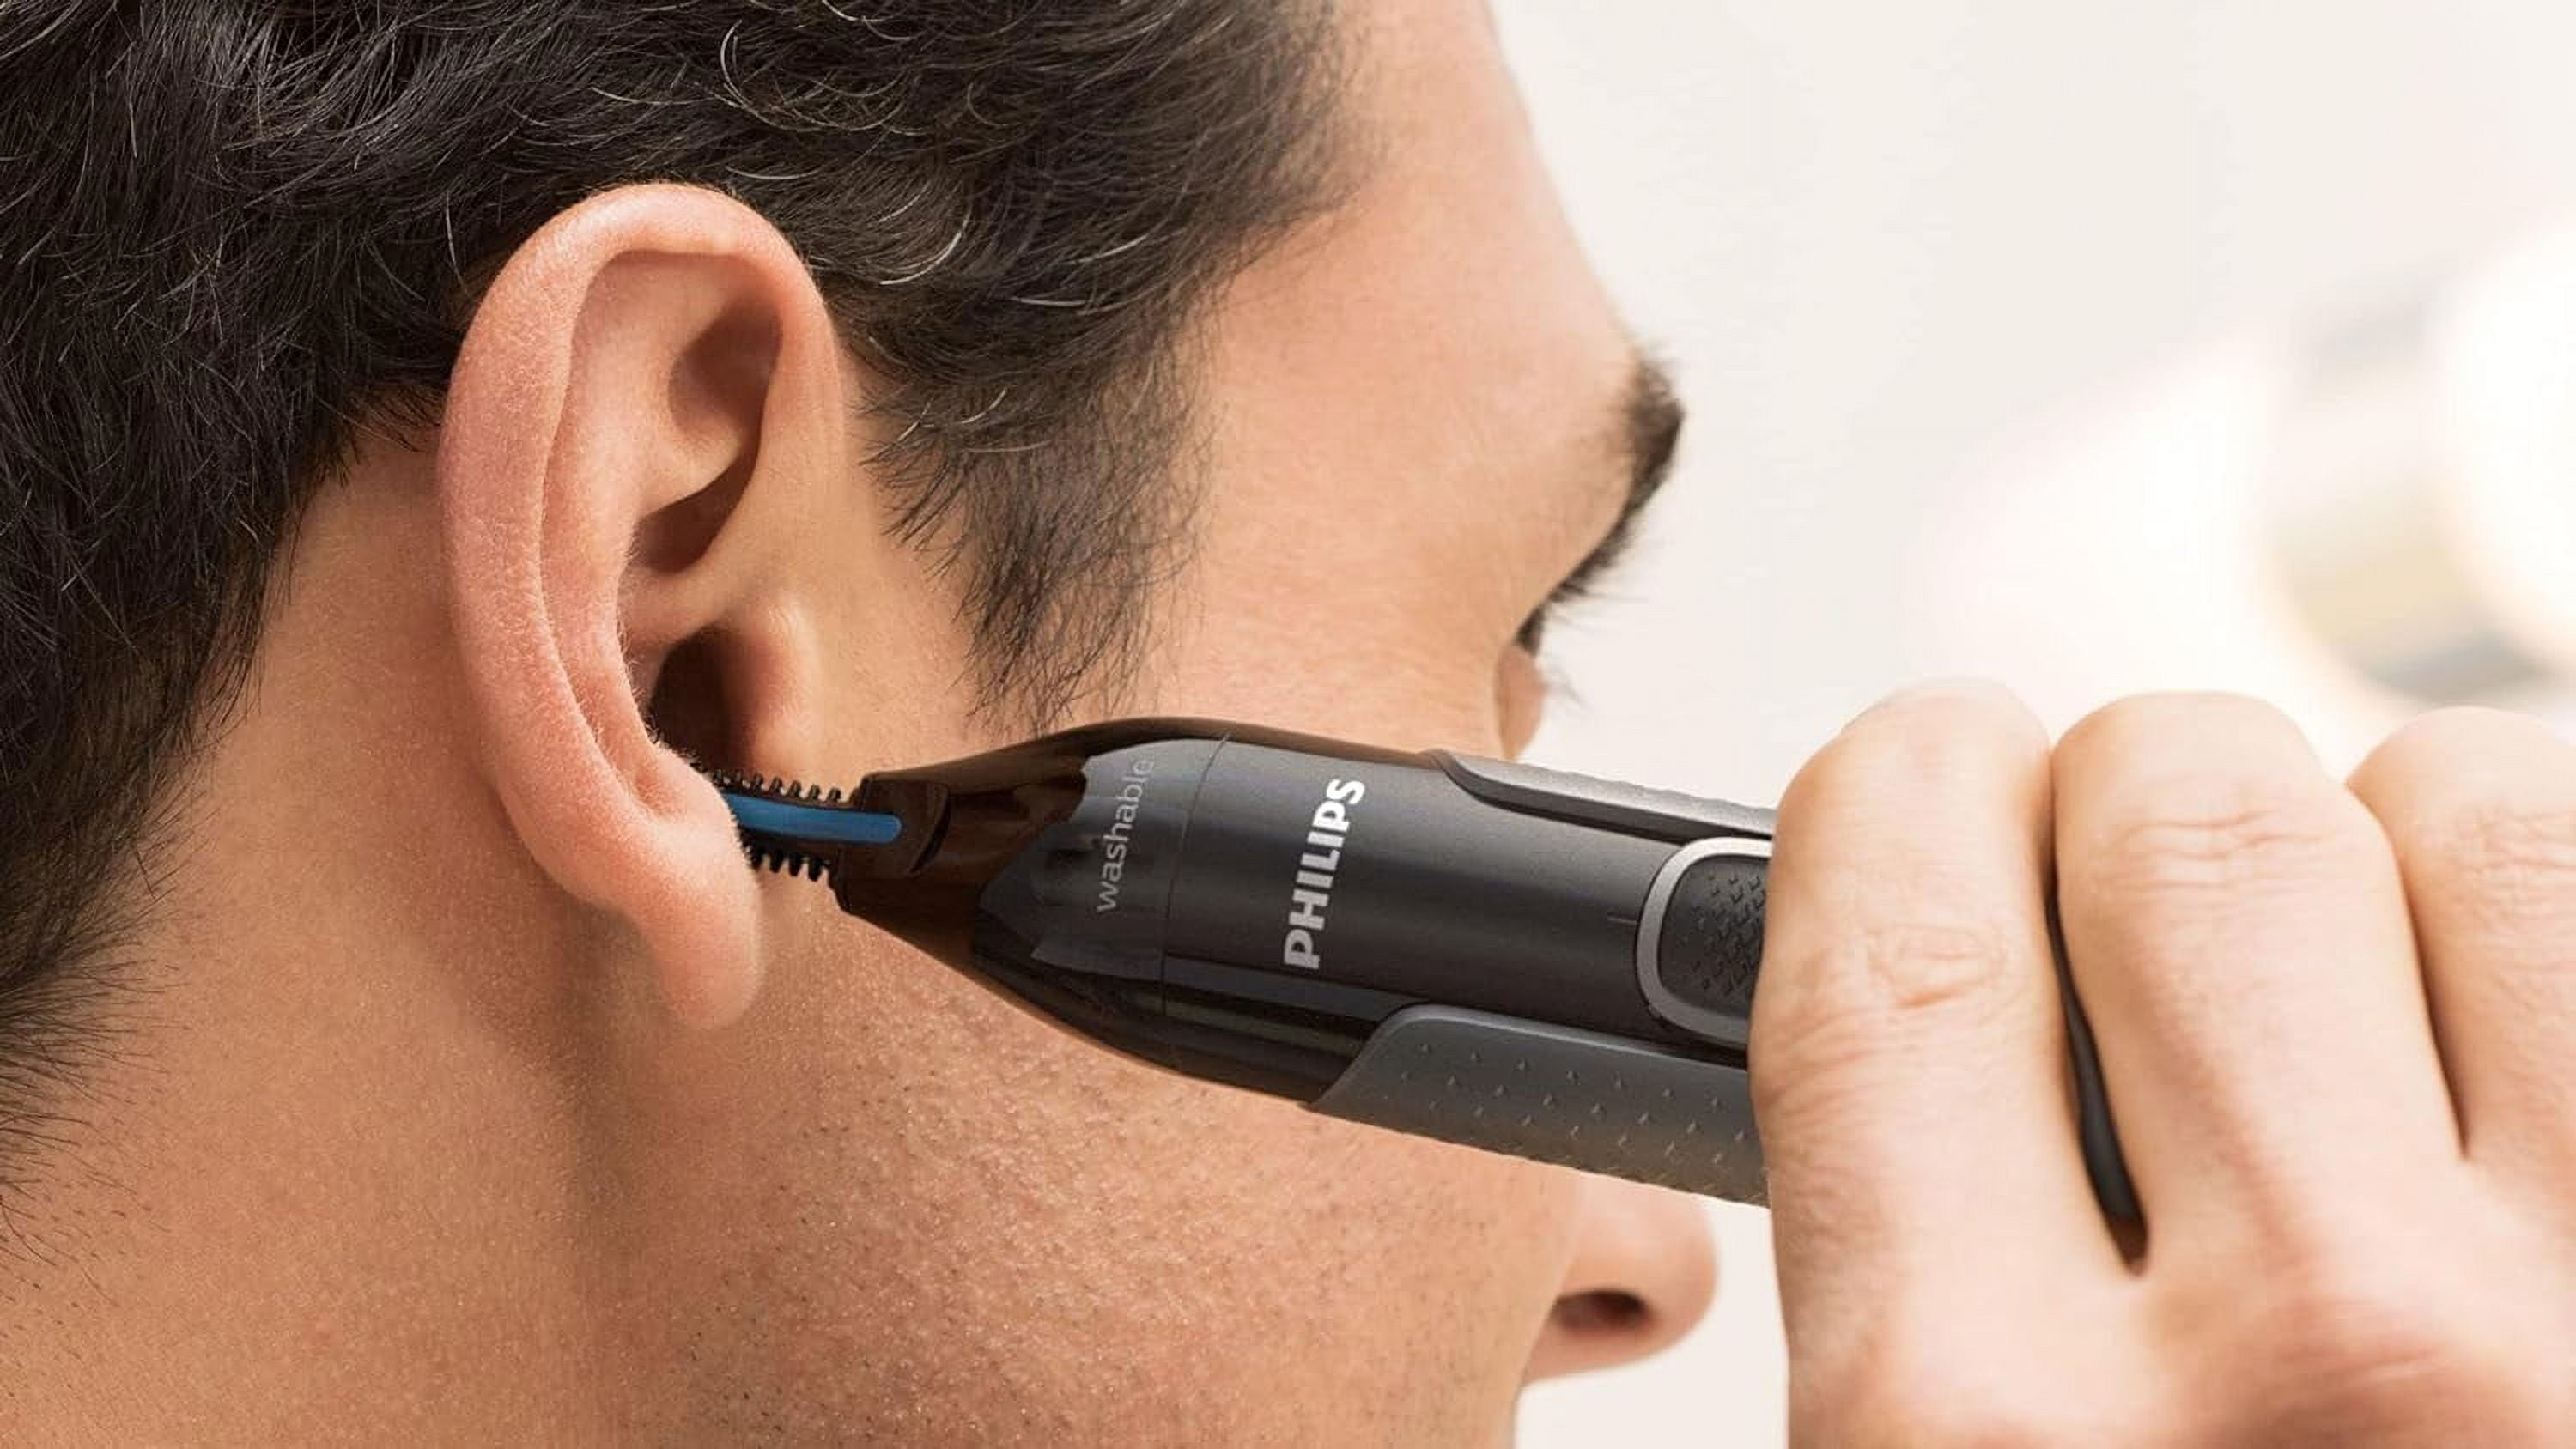 PHILIPS NT3650/16 Series 3000 Waterproof Nose and Ear Trimmer